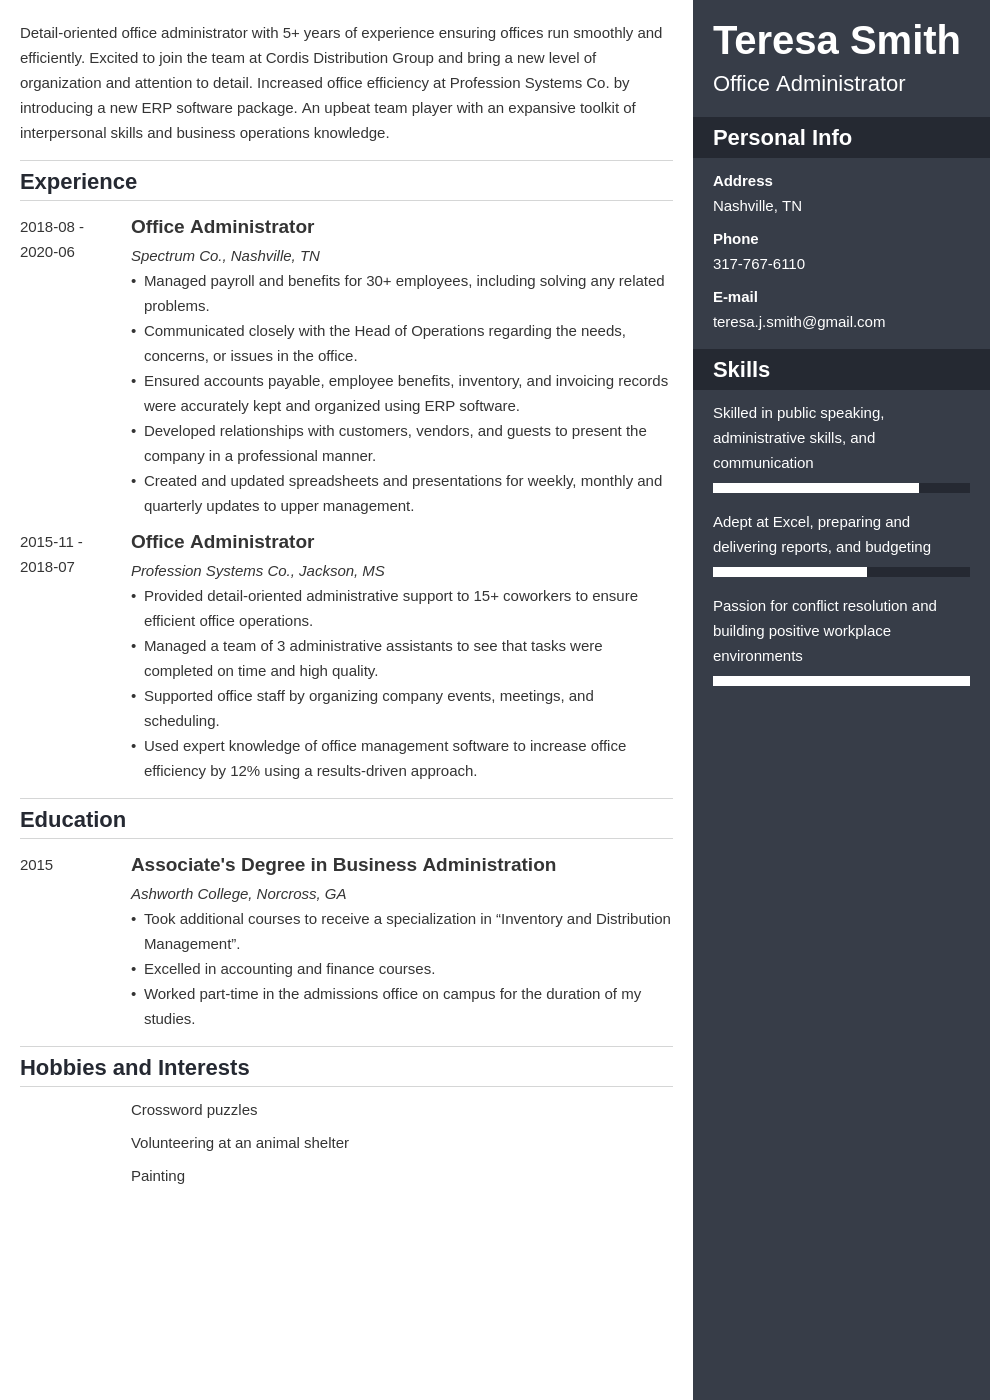 Office Administrator Resume Examples and Guide [10+ Tips]